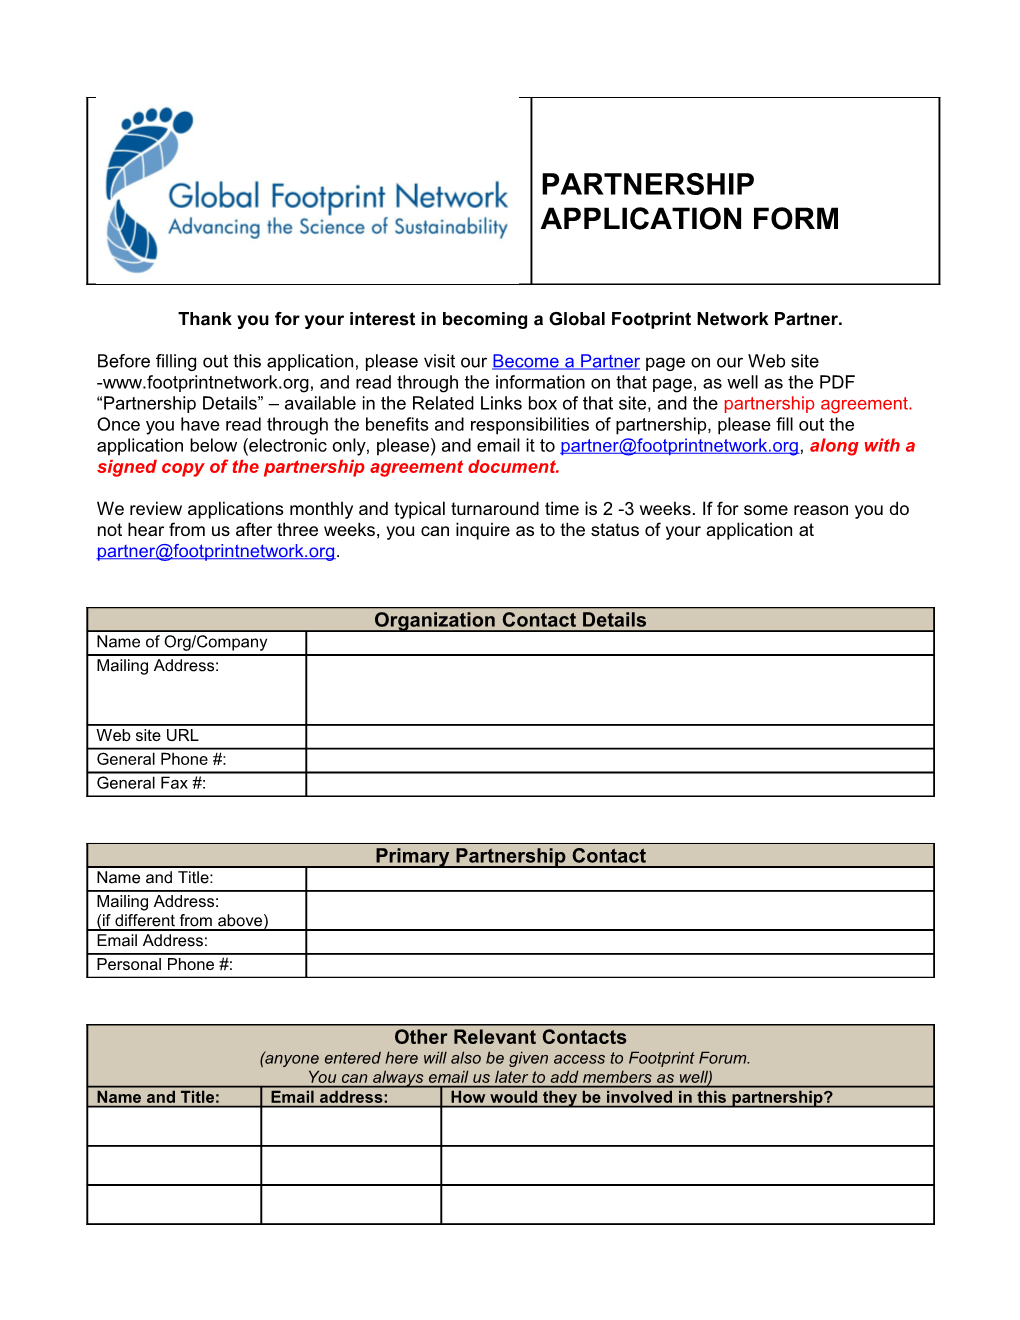 Thank You for Your Interest in Becoming a Global Footprint Network Partner